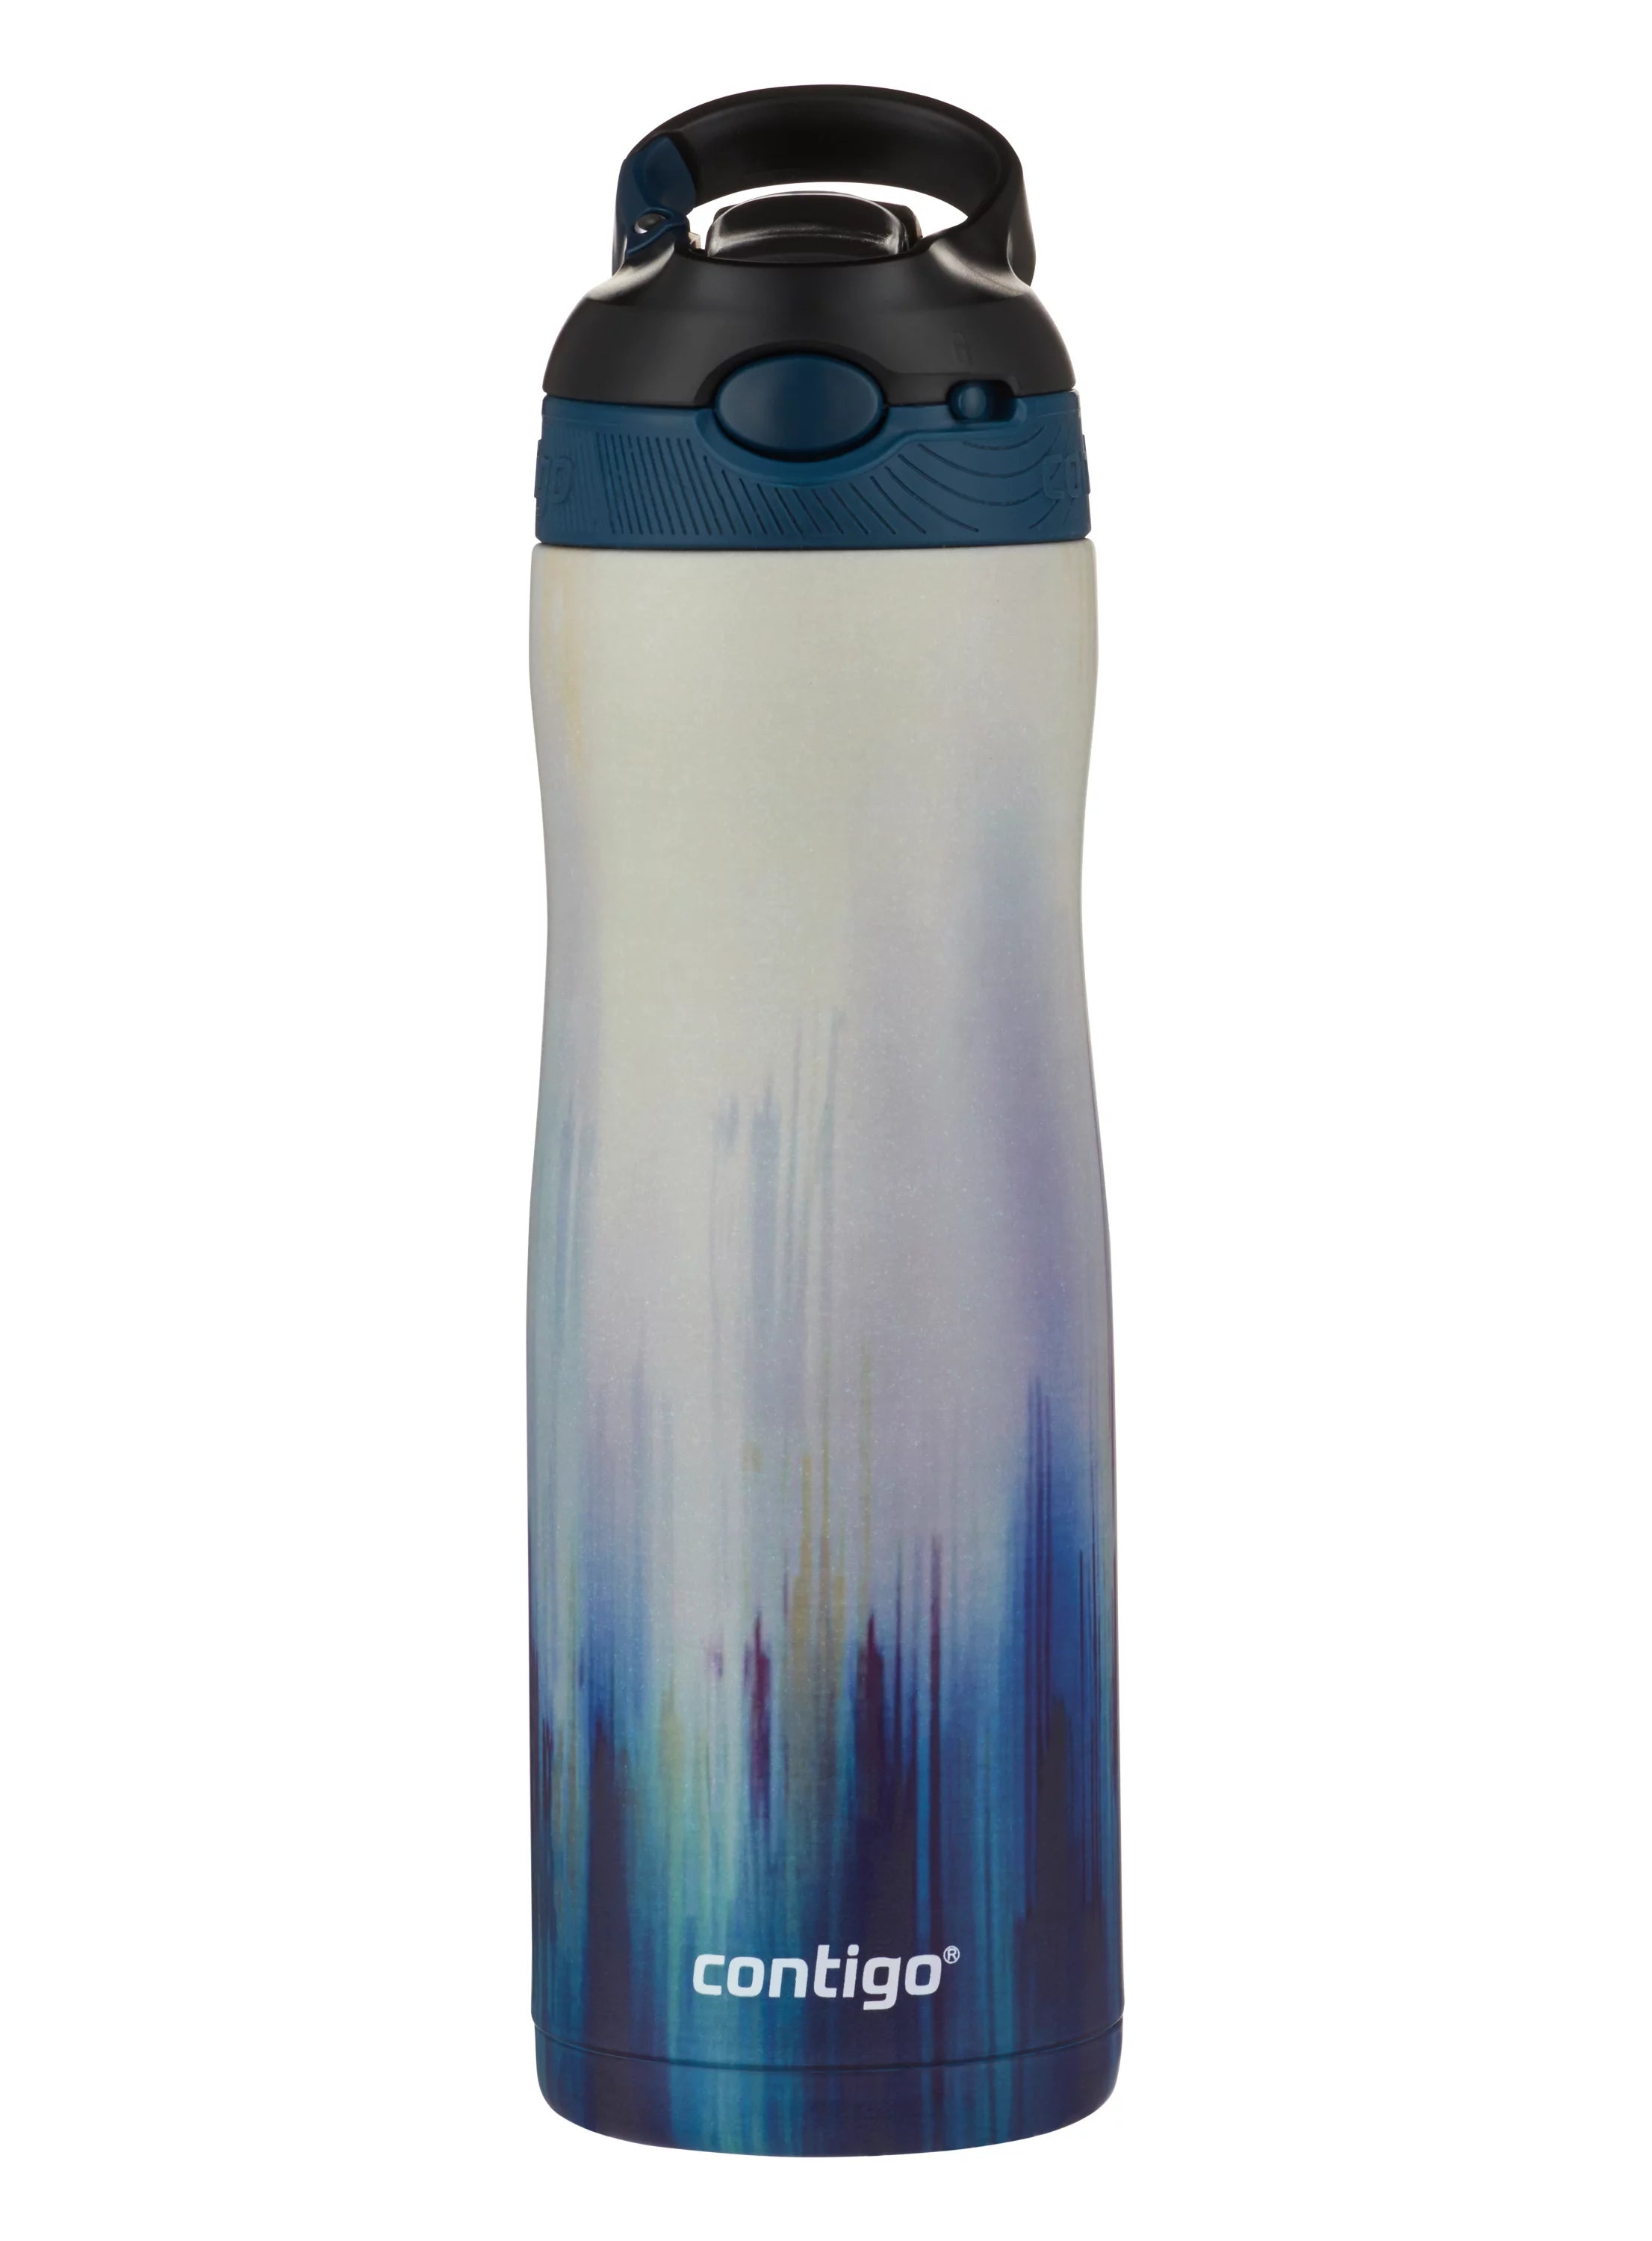 Contigo Autospout Ashland Couture Chill Vacuum Insulated Stainless Steel Water Bottle 590ml